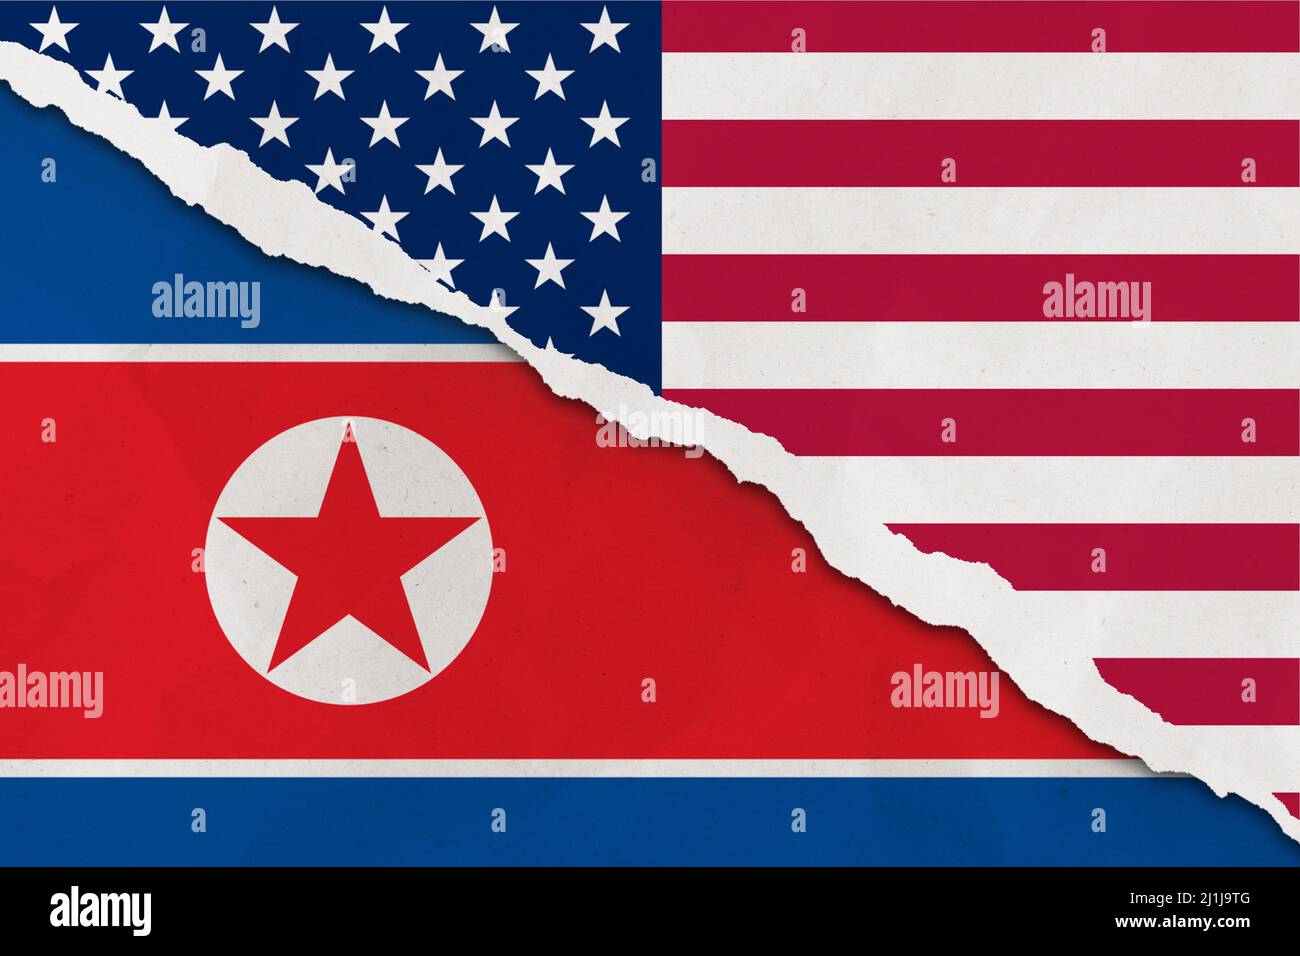 United States and North Korea flag ripped paper grunge background. Abstract United States and North Korea economics, politics conflicts, war concept Stock Photo